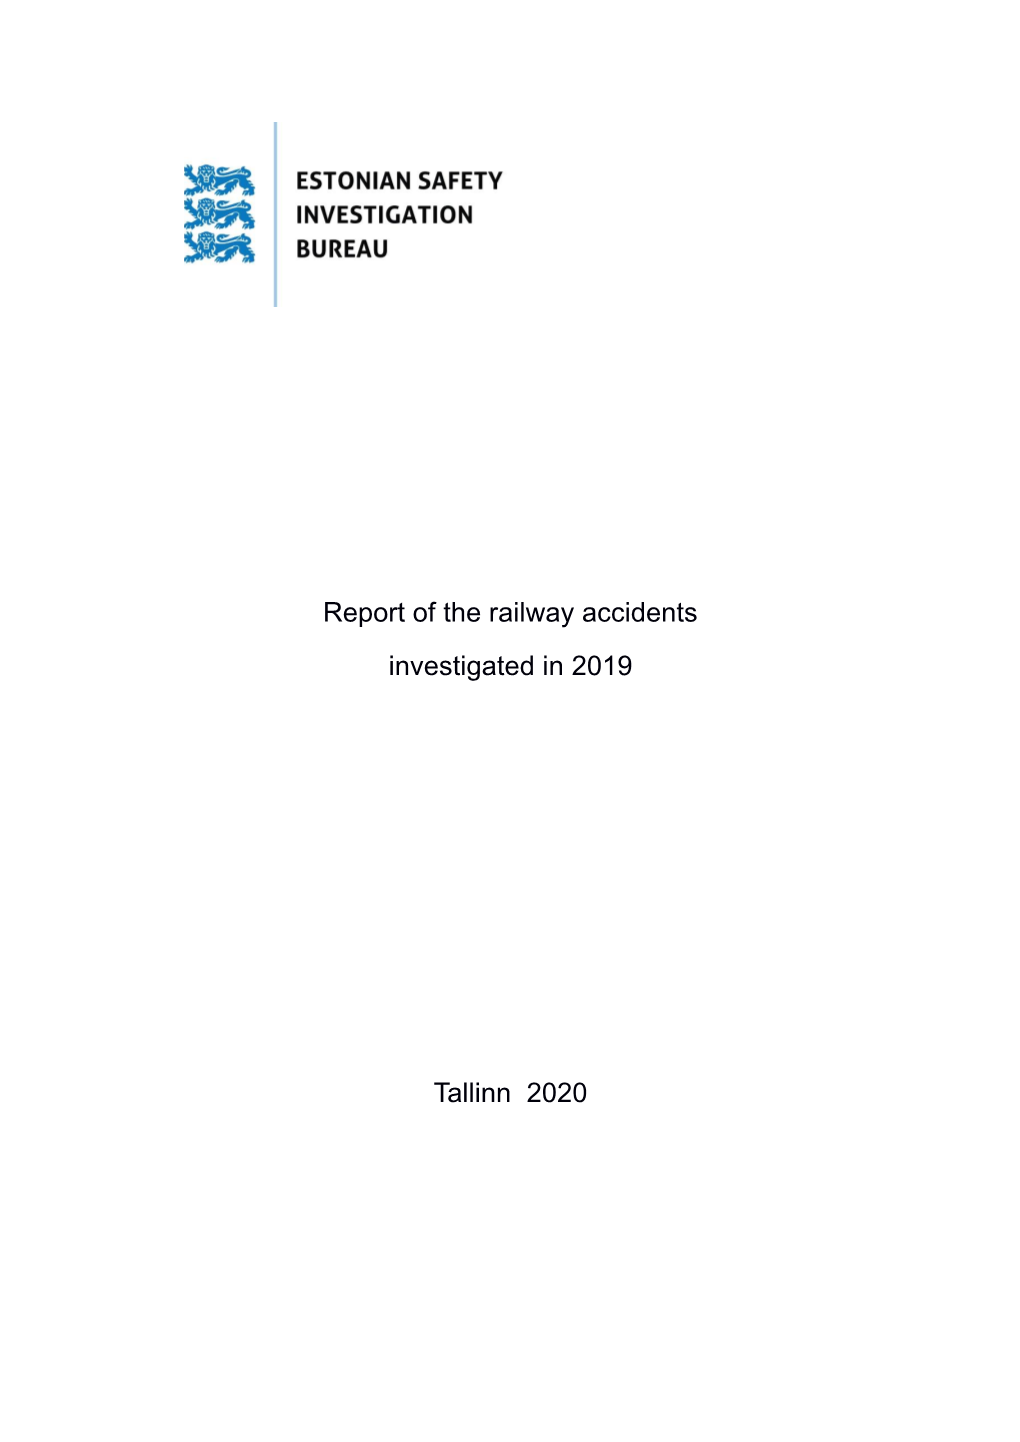 Report of the Railway Accidents Investigated in 2019 Tallinn 2020